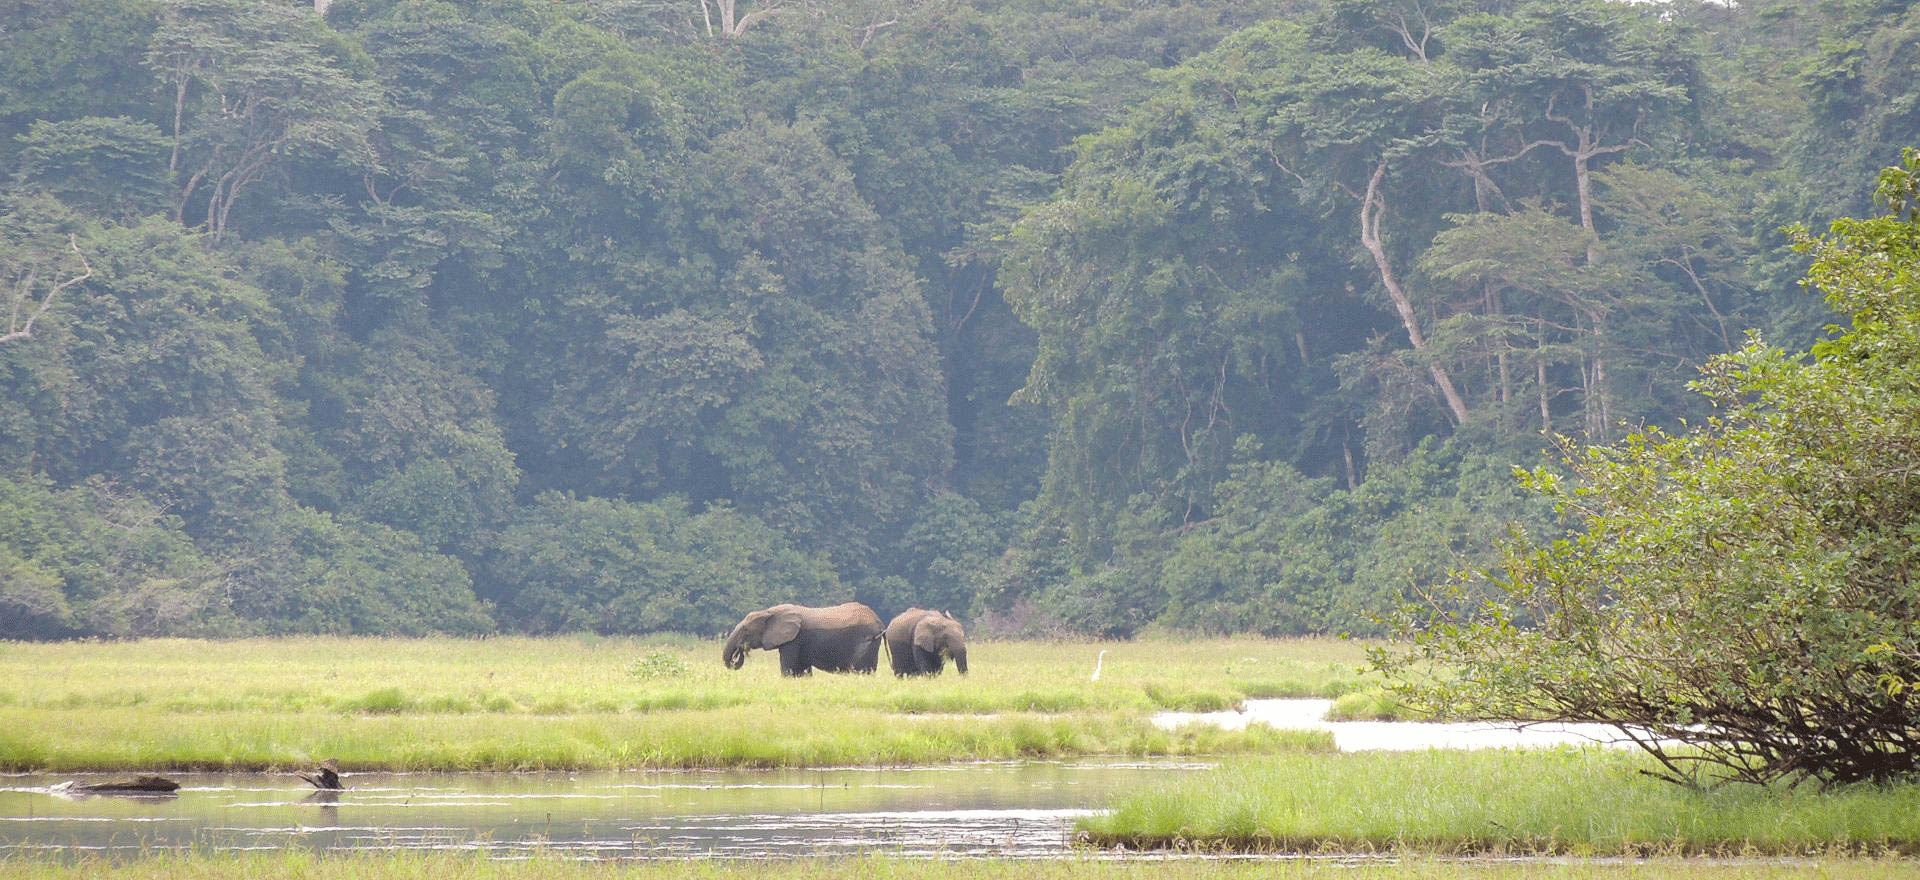 Elephants in Loango National Park - Gabon Holidays and Tours